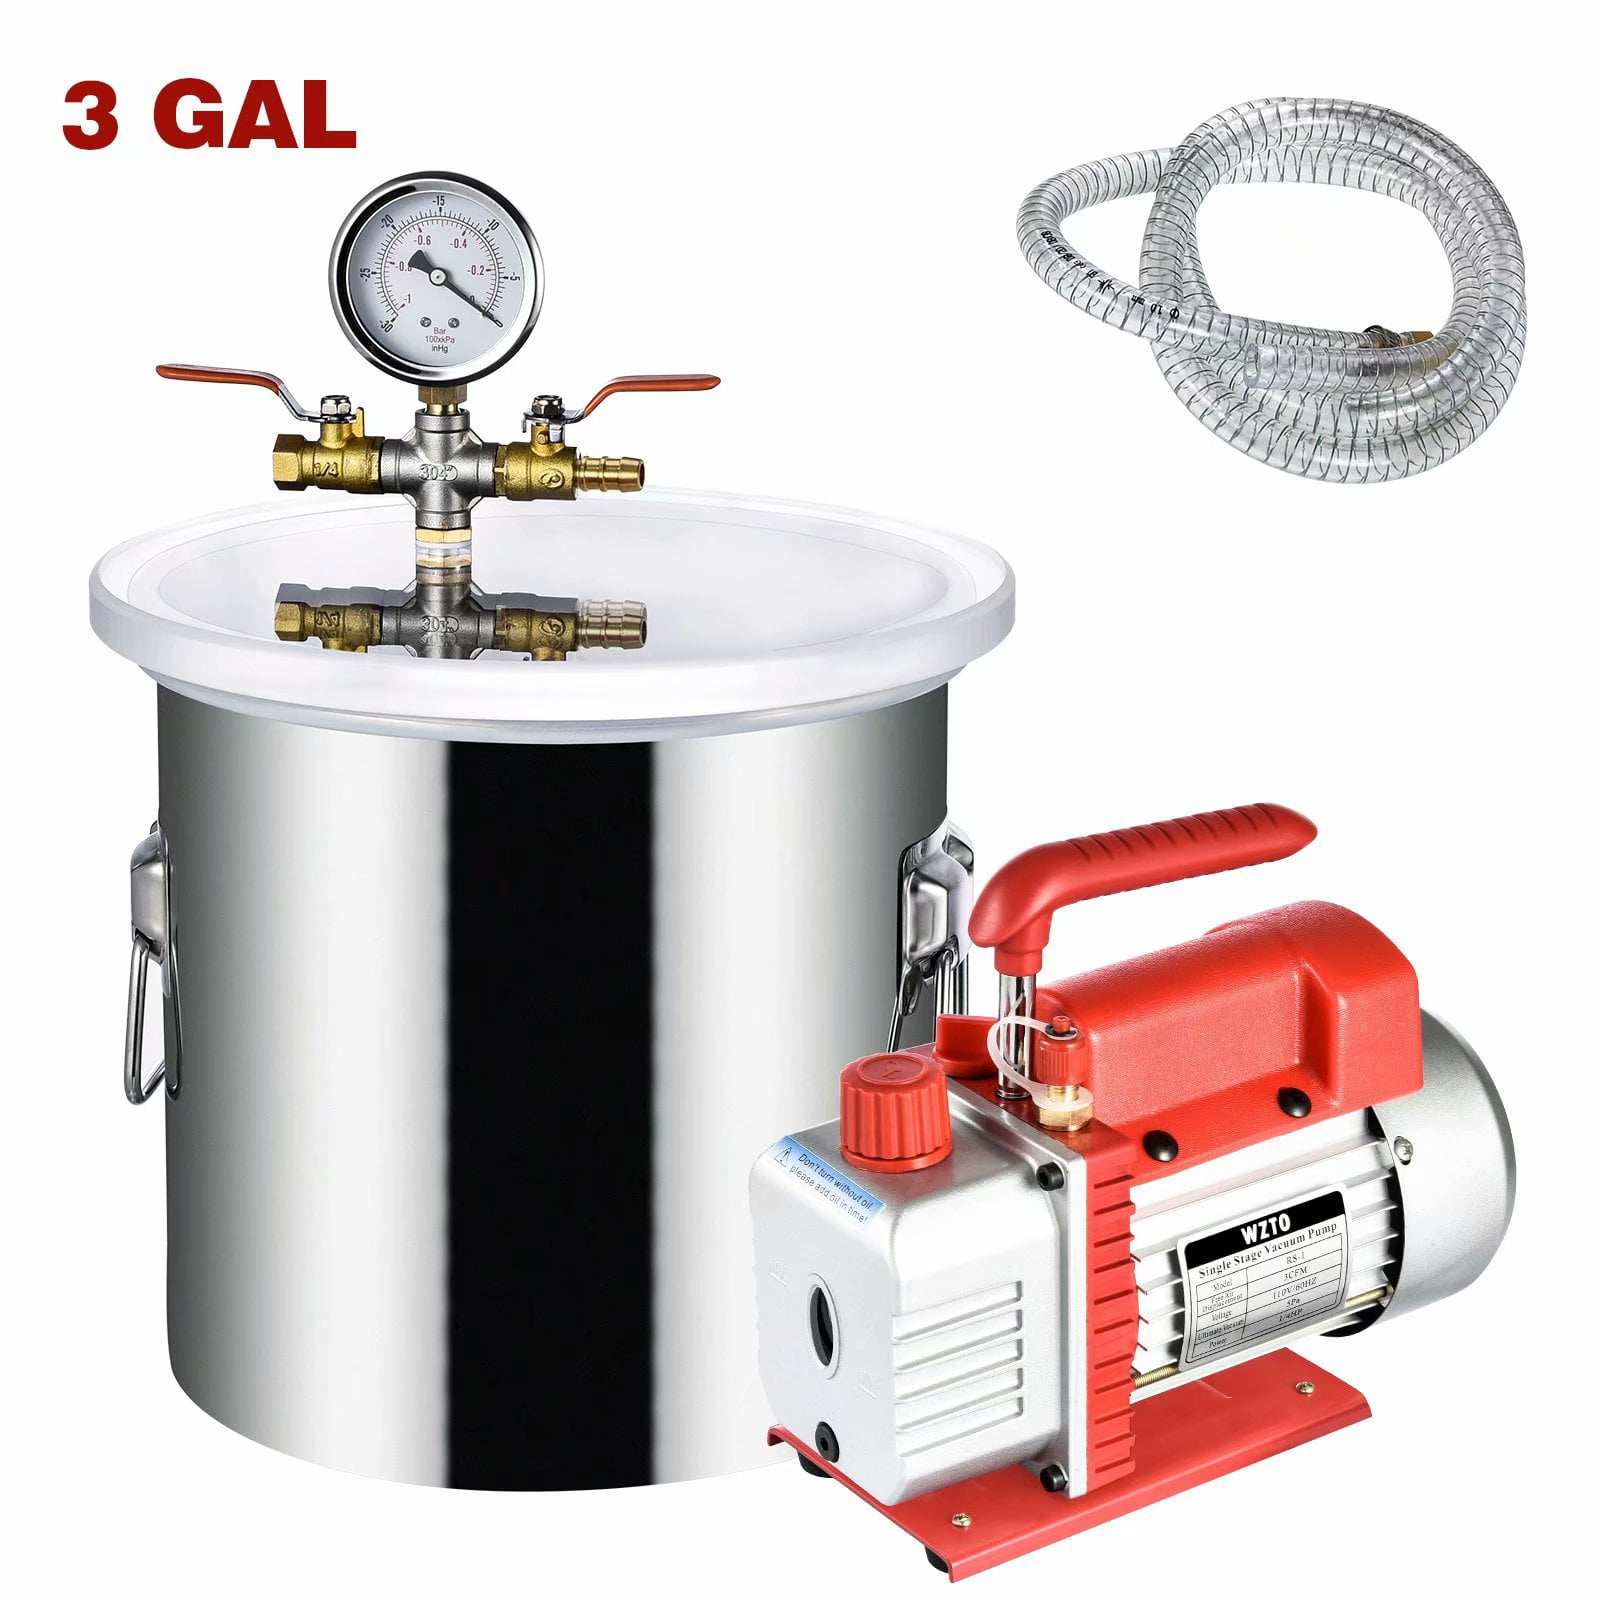 1.5 Gallon Tall Stainless Steel Best Value Vacs Vacuum Degassing Chamber and VE115 3CFM Single Stage Vacuum Pump Kit 